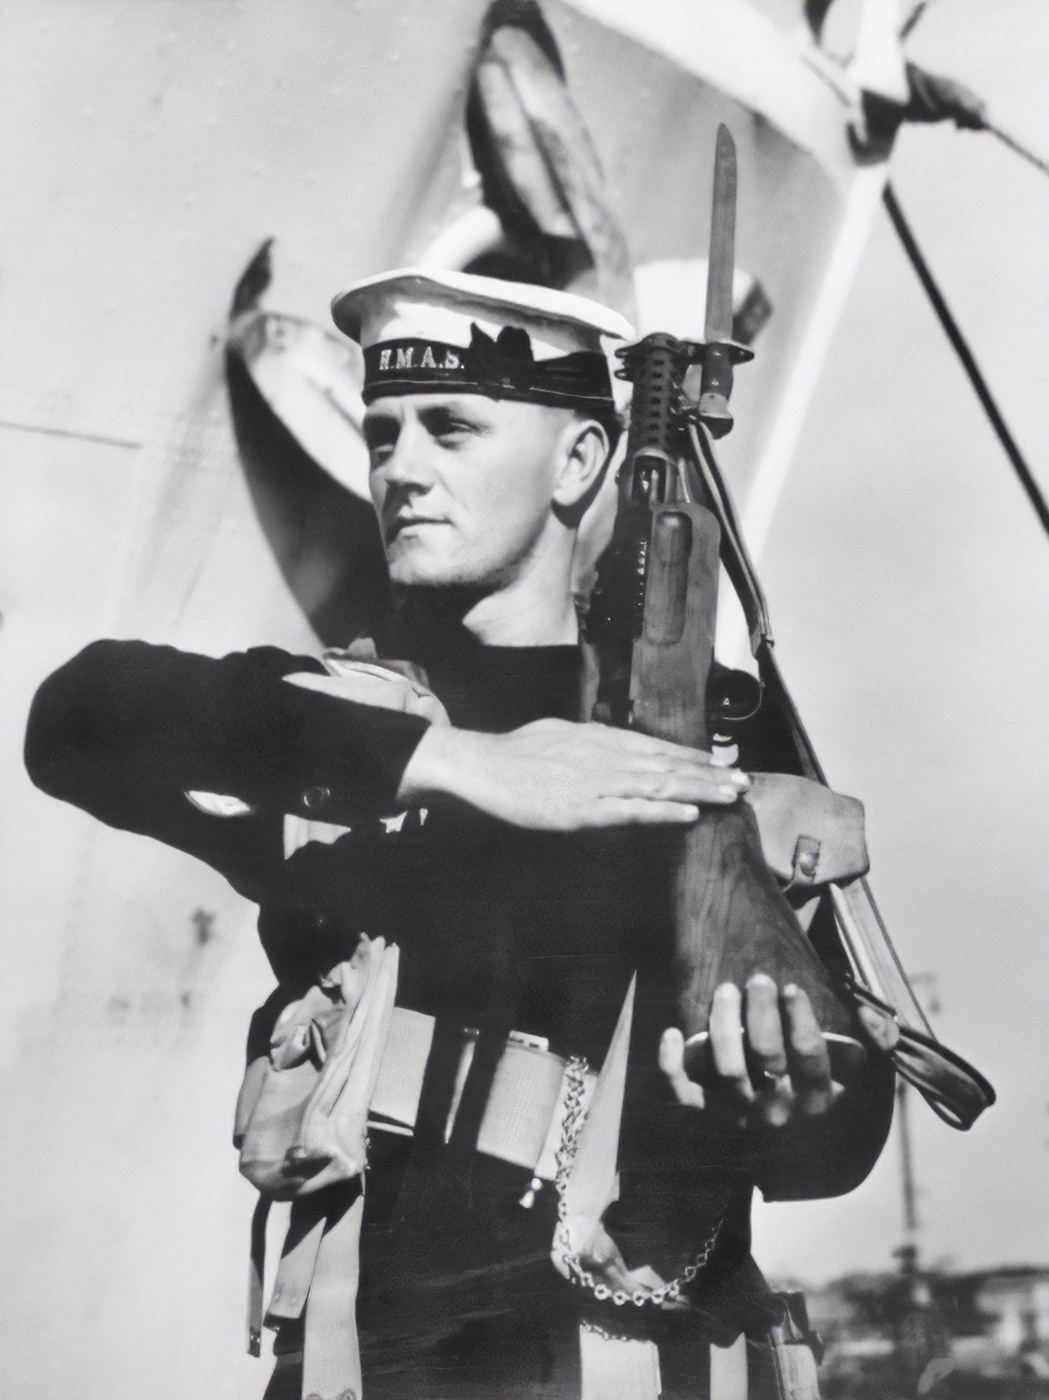 sailor of Royal Australian Navy with Lanchester SMG